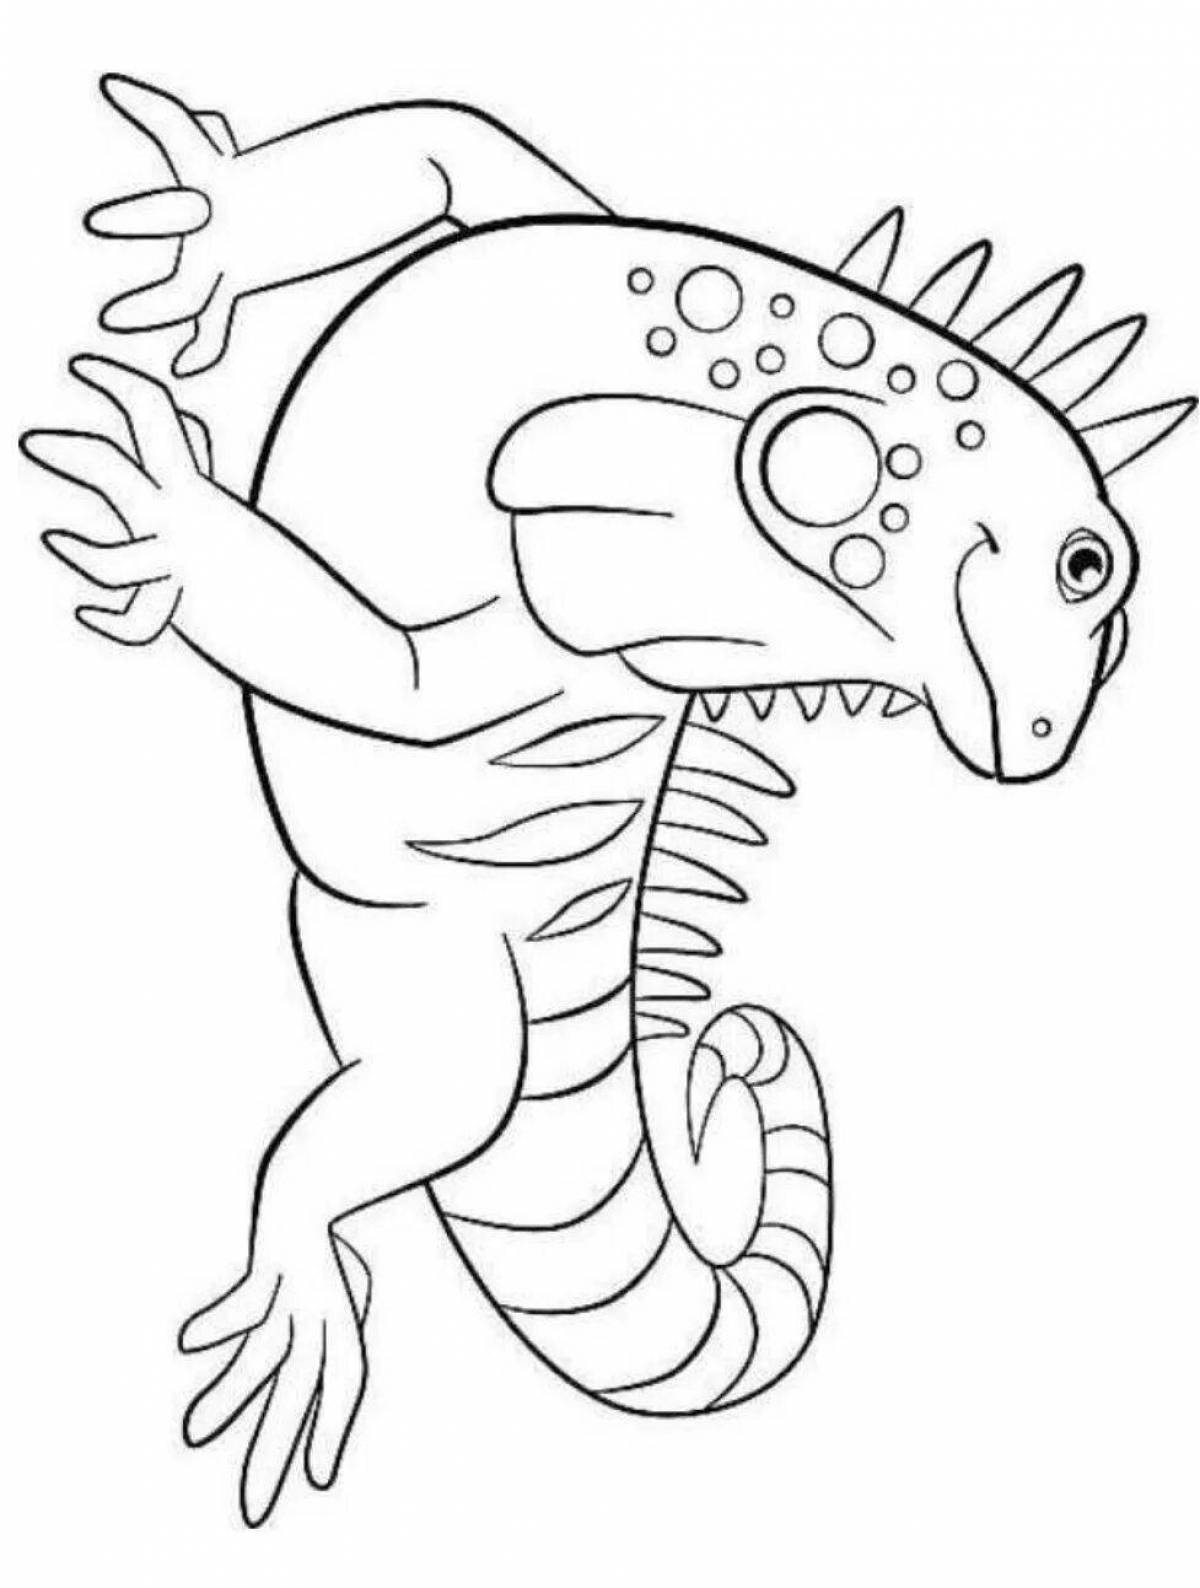 Incredible iguana coloring book for kids